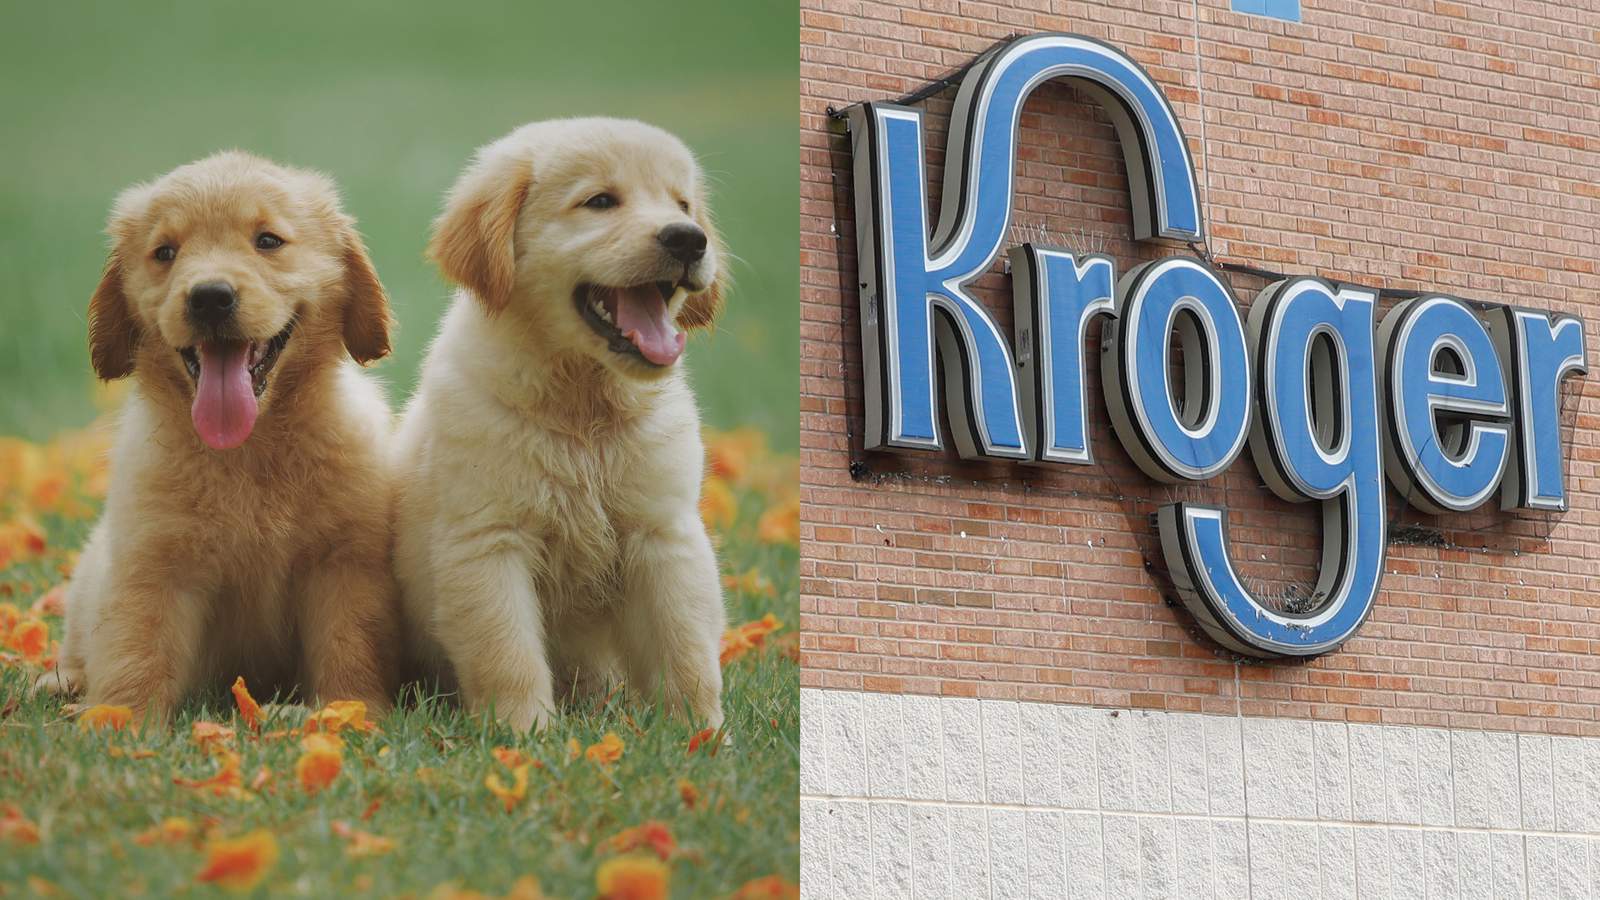 You can check puppy off your shopping list as Kroger hosts pet adoption event